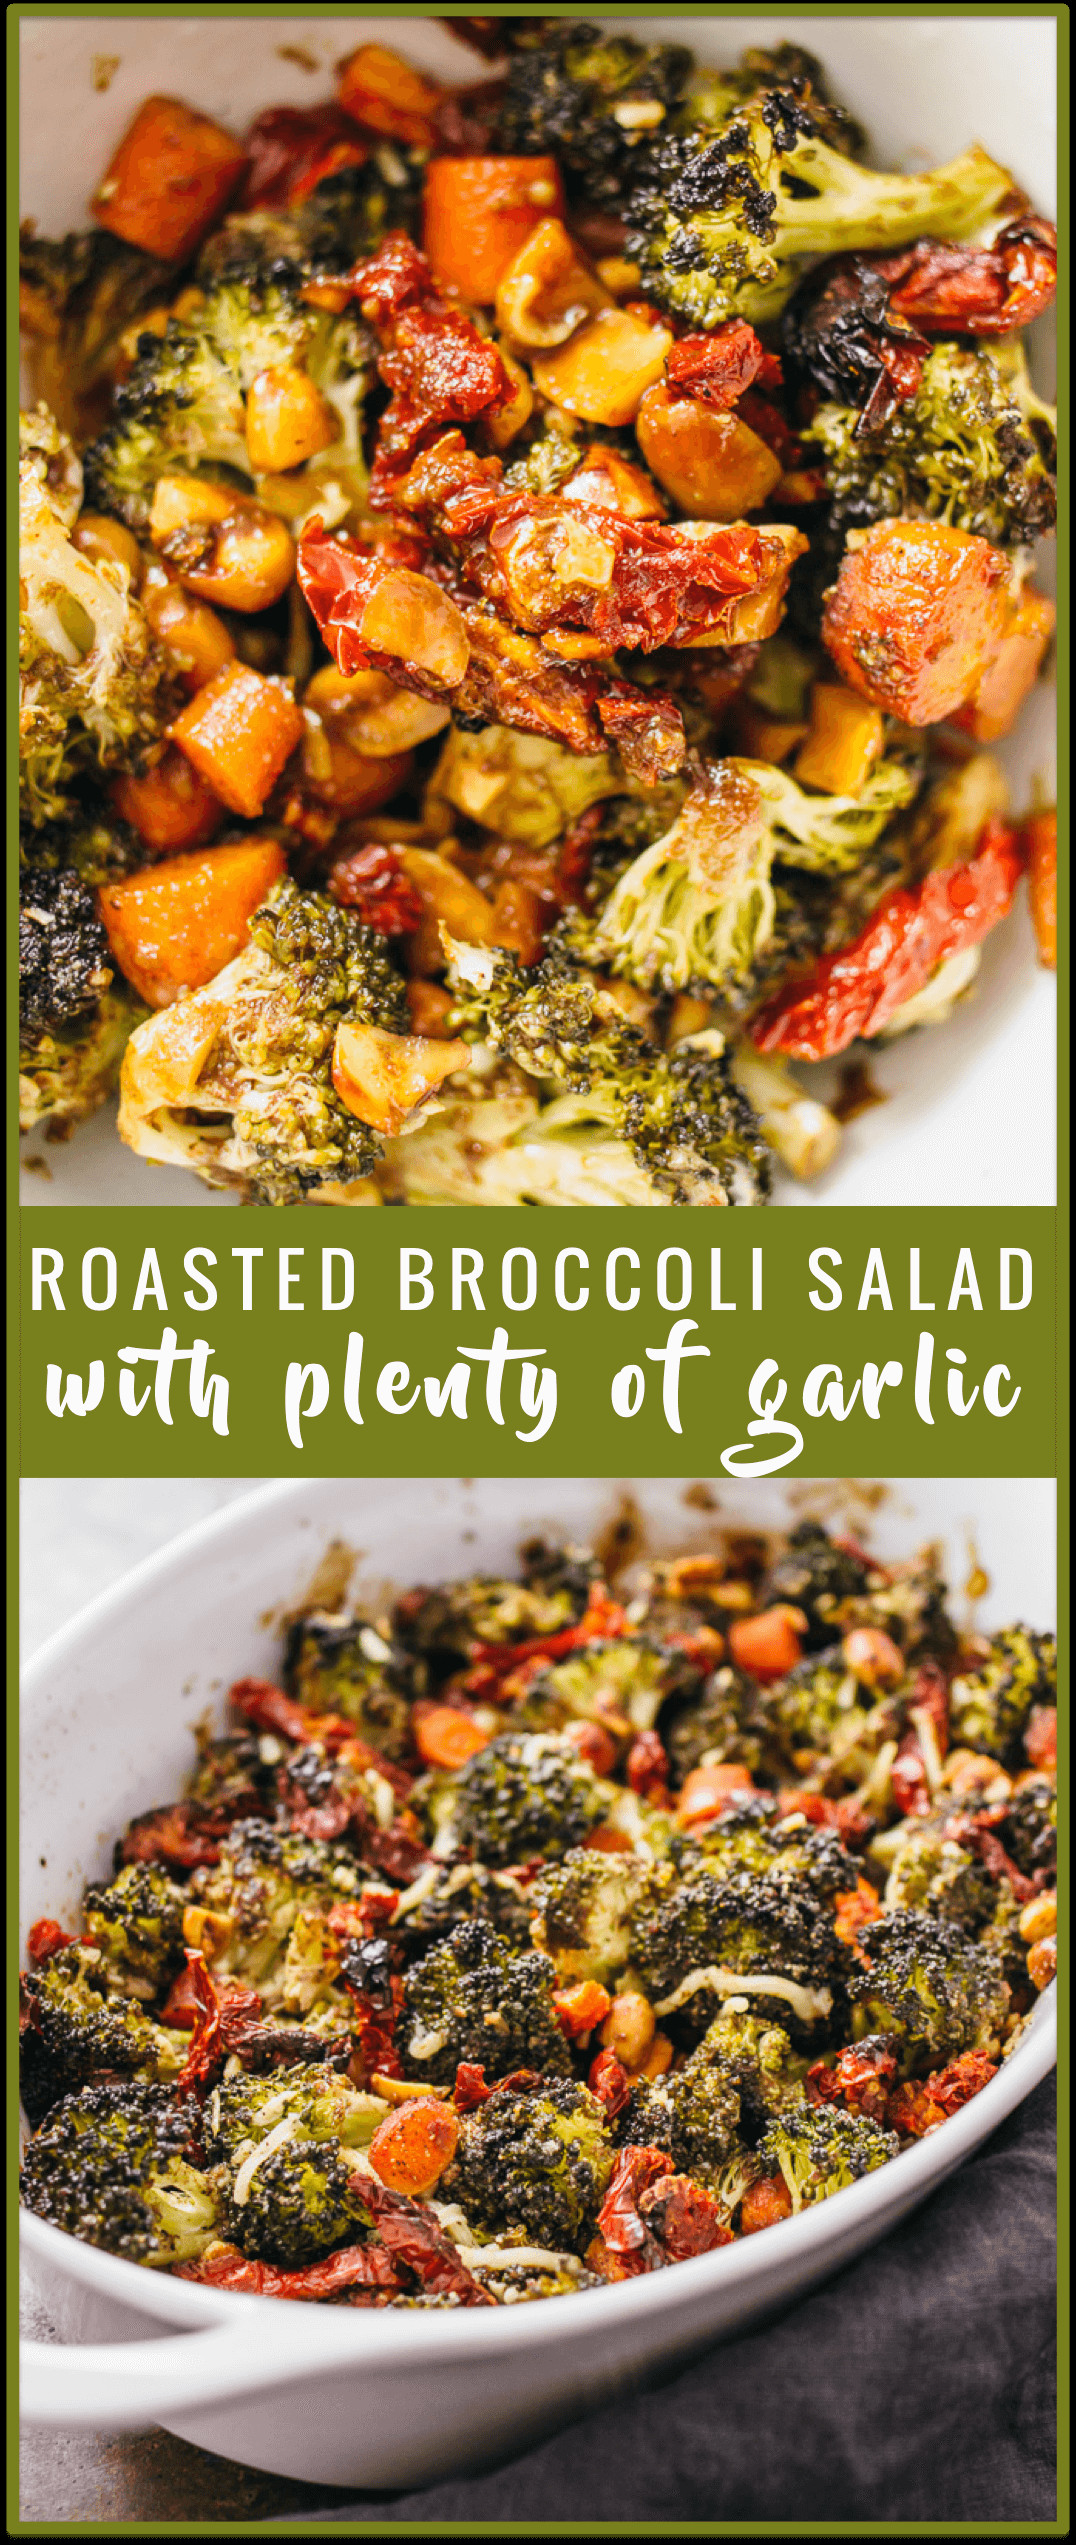 Broccoli Main Dish Recipes
 Roasted broccoli salad with garlic This is one of my